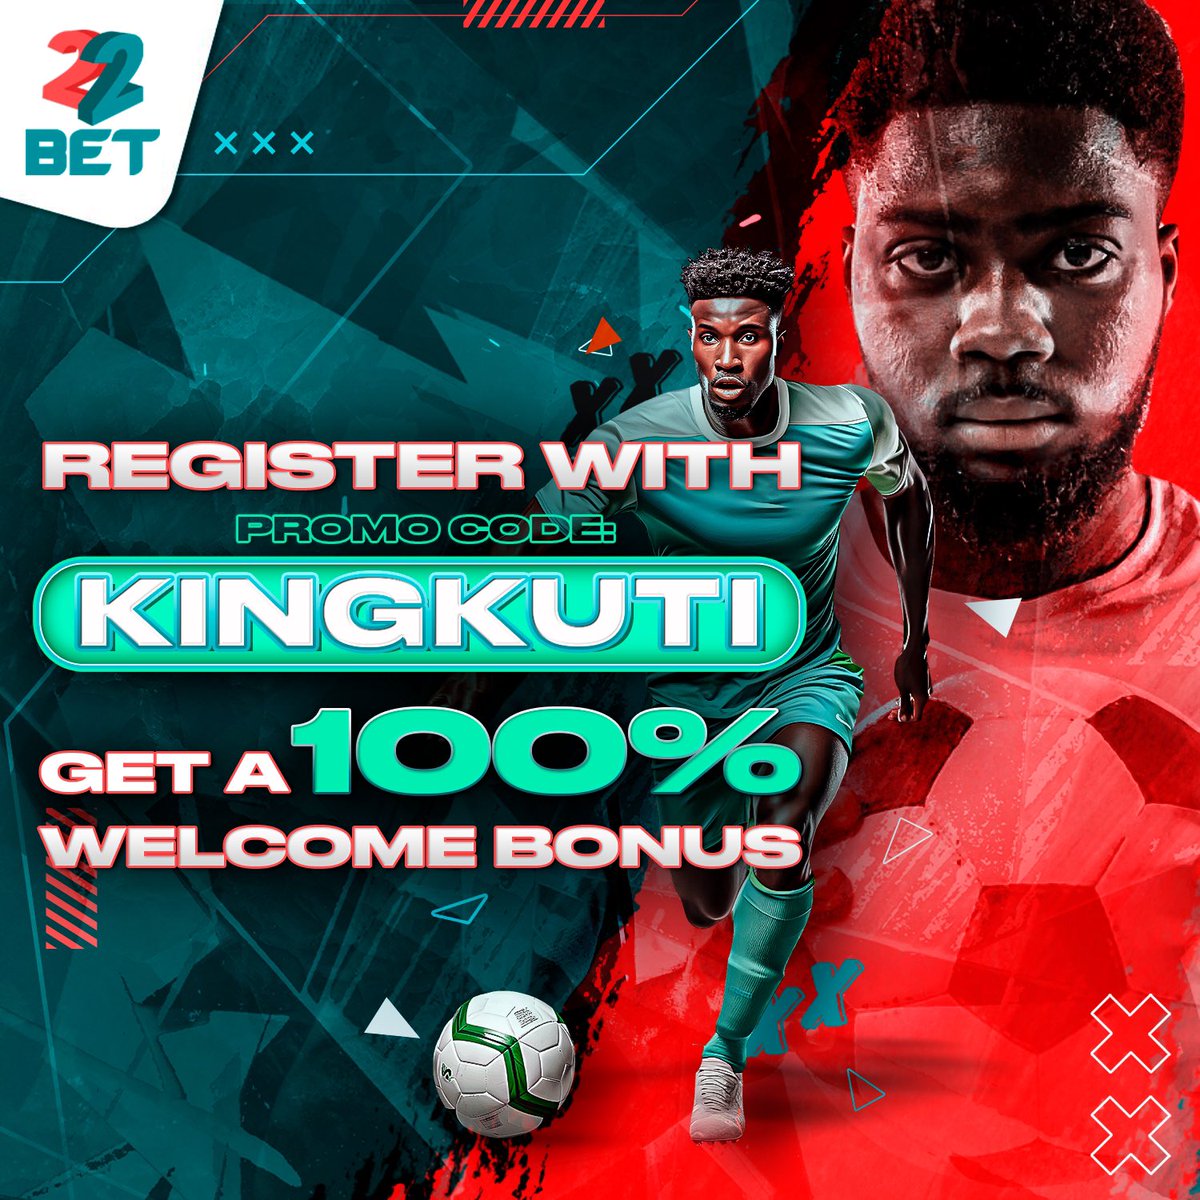 Today’s game on @22betNaija Code 👉 TC2N2 Have you Registered on 22bet yet?? Register now using this link 👇👇👇 cutt.ly/4wiuliqi Promo Code ➡️ KingKuti